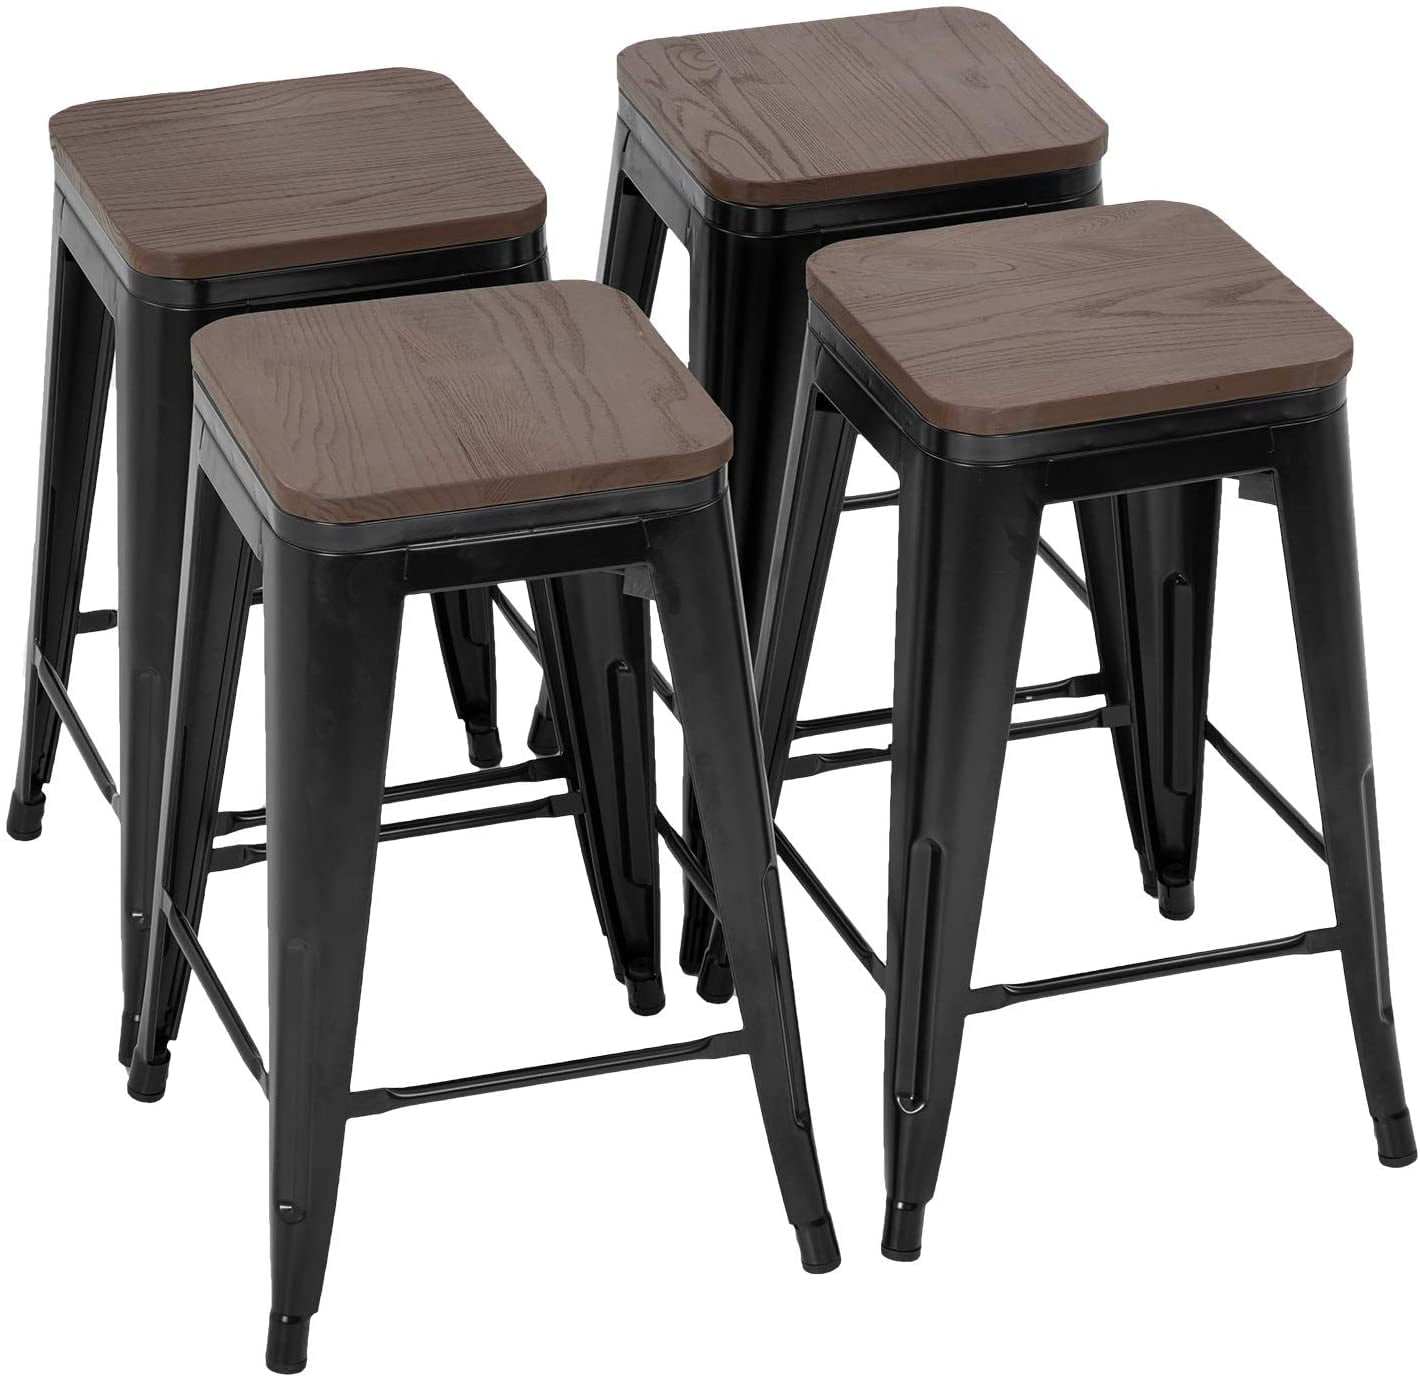 FDW Metal Bar Stool Set of 4 Counter Barstool with Back 24 Inches Wood Seat Height Bronze